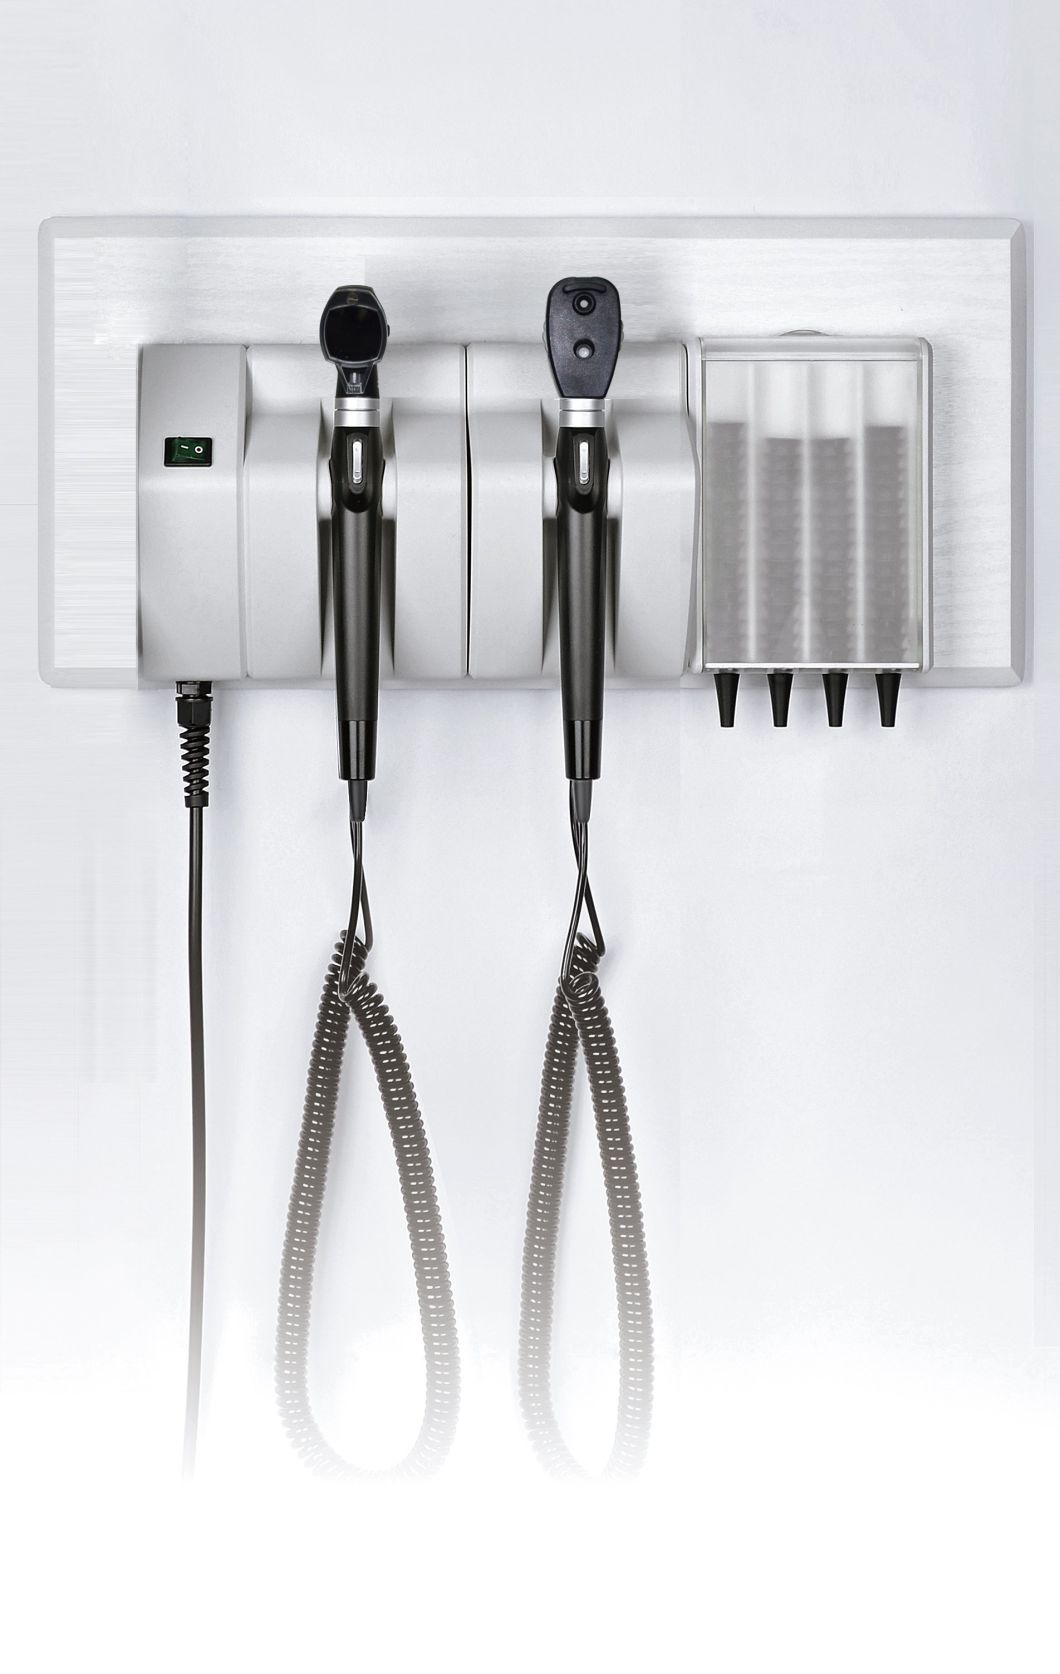 Ent Otoscope & Ophthalmoscope of Integrated Wall System From China Msloo2